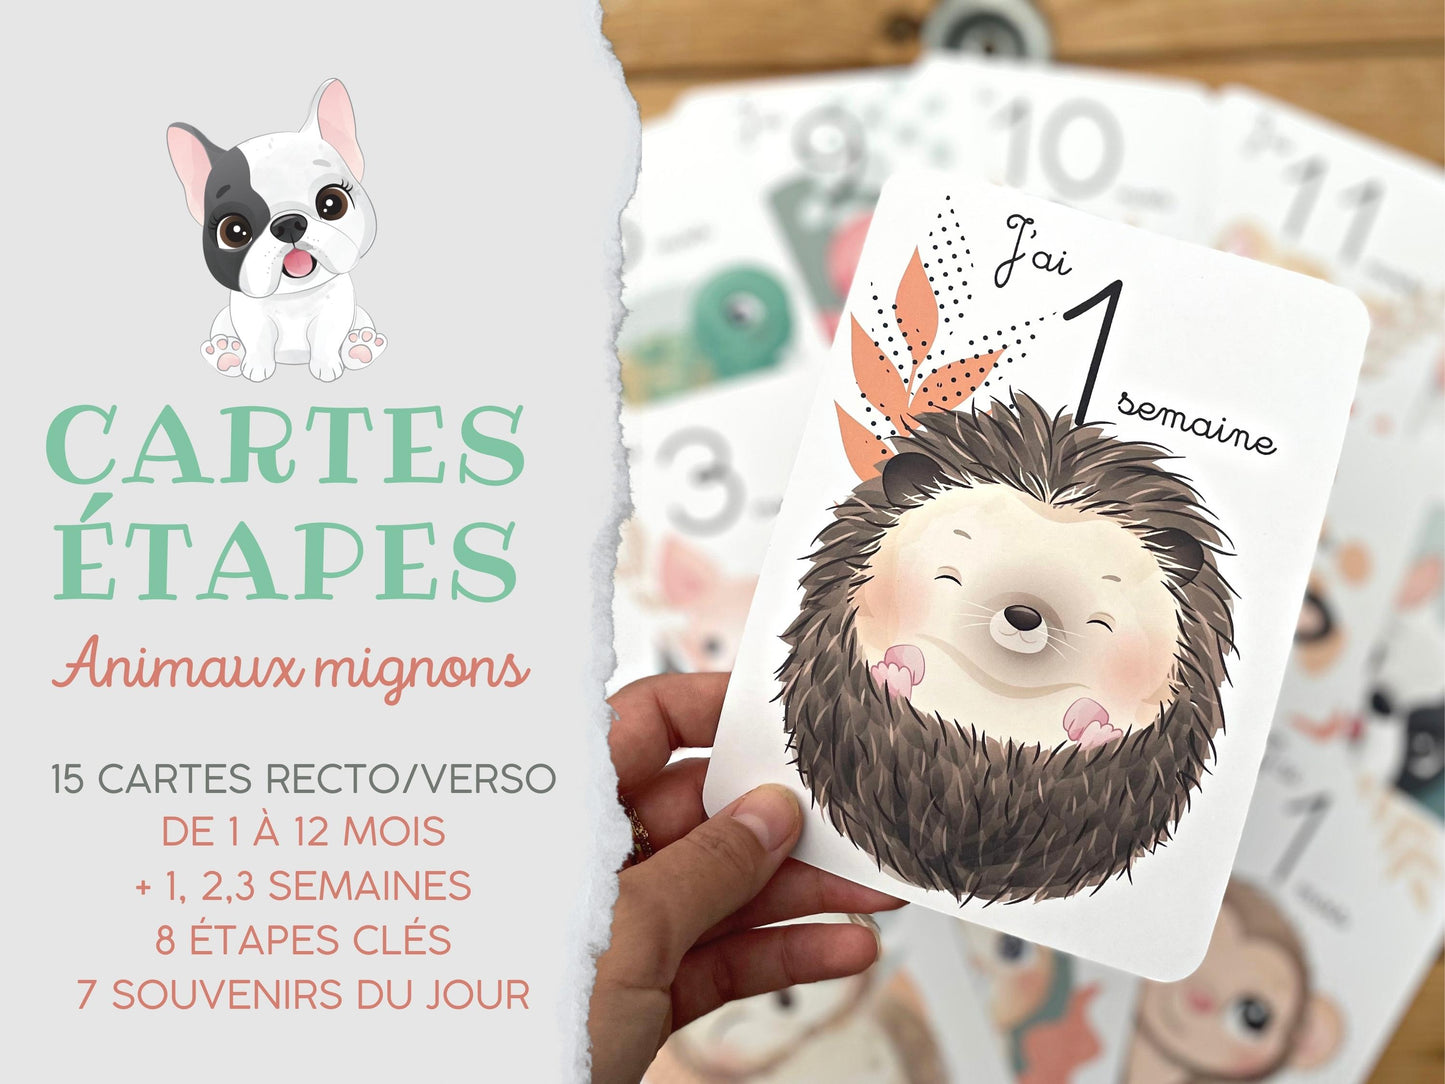 Stages card - 1 week 12 months - Cute jungle forest animals 0 1 year